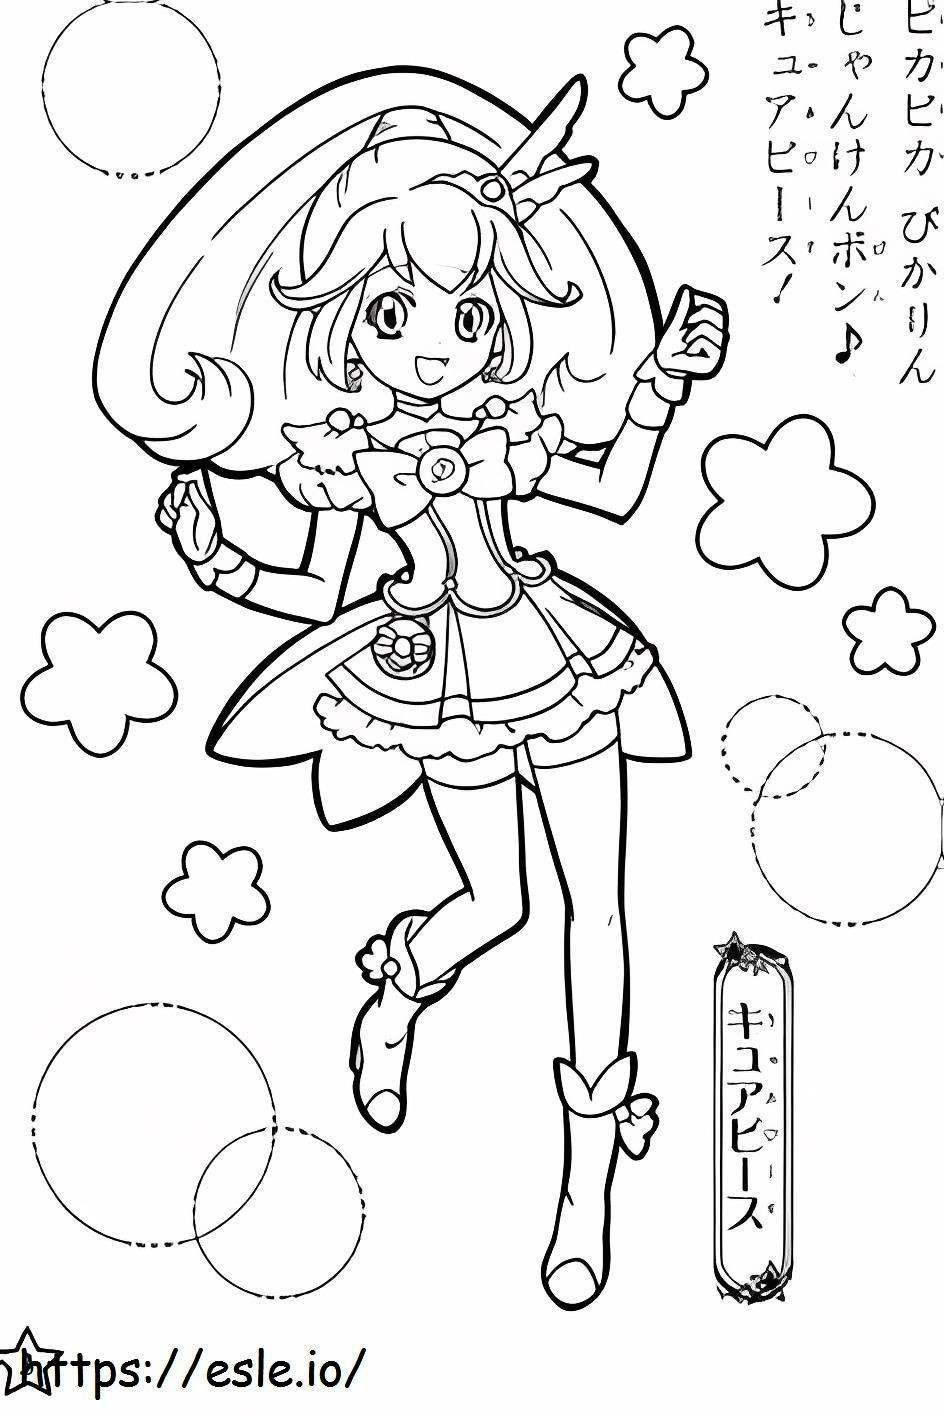 Lily Cure Peace coloring page